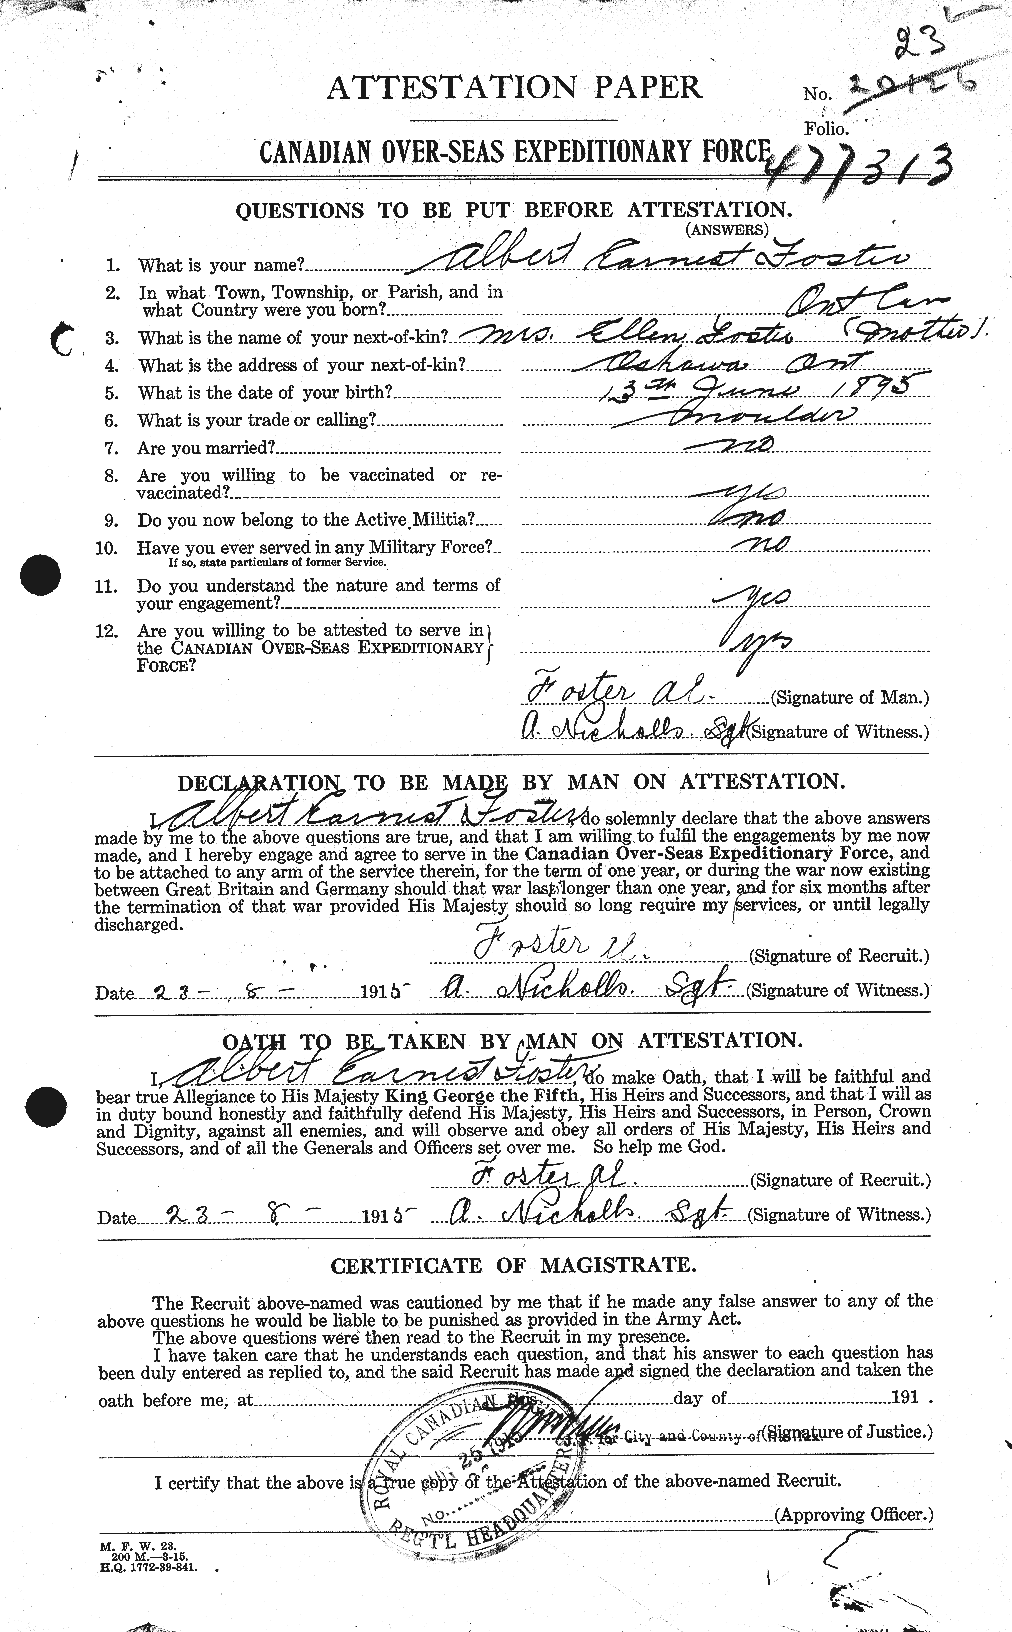 Personnel Records of the First World War - CEF 330434a